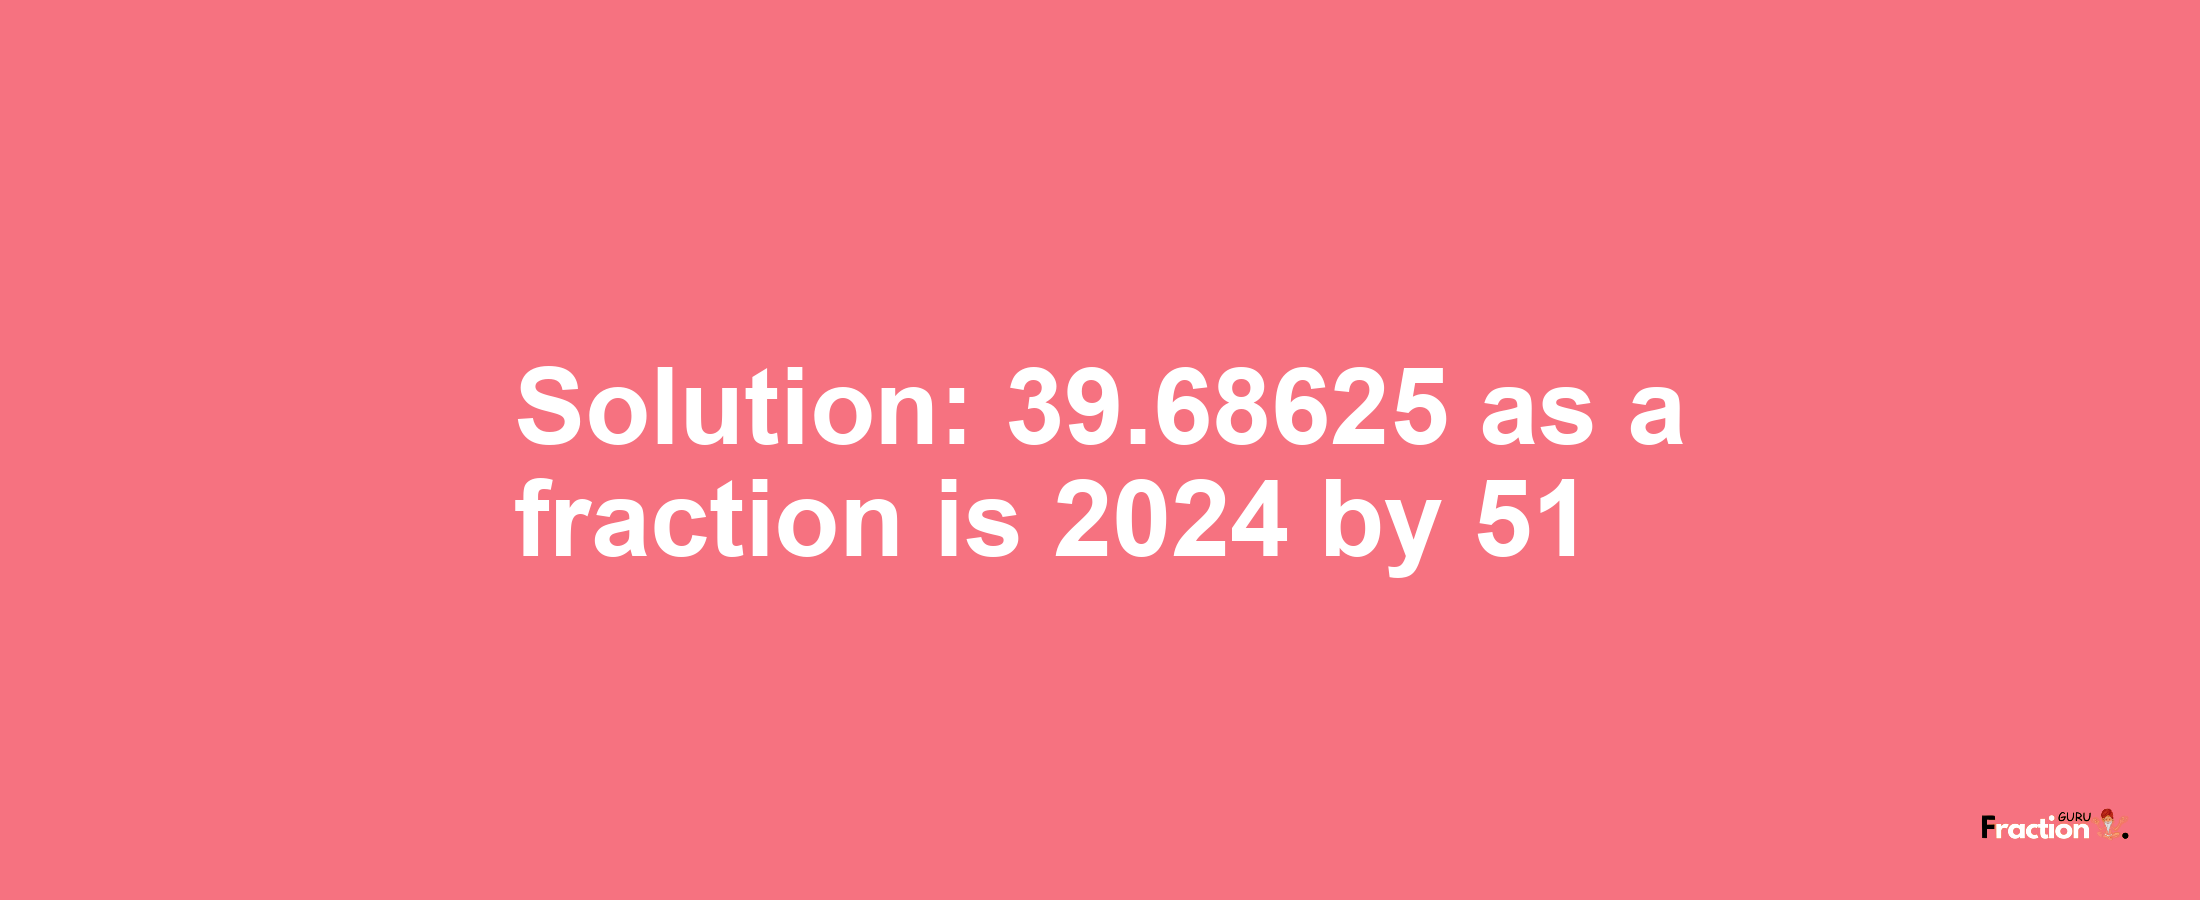 Solution:39.68625 as a fraction is 2024/51